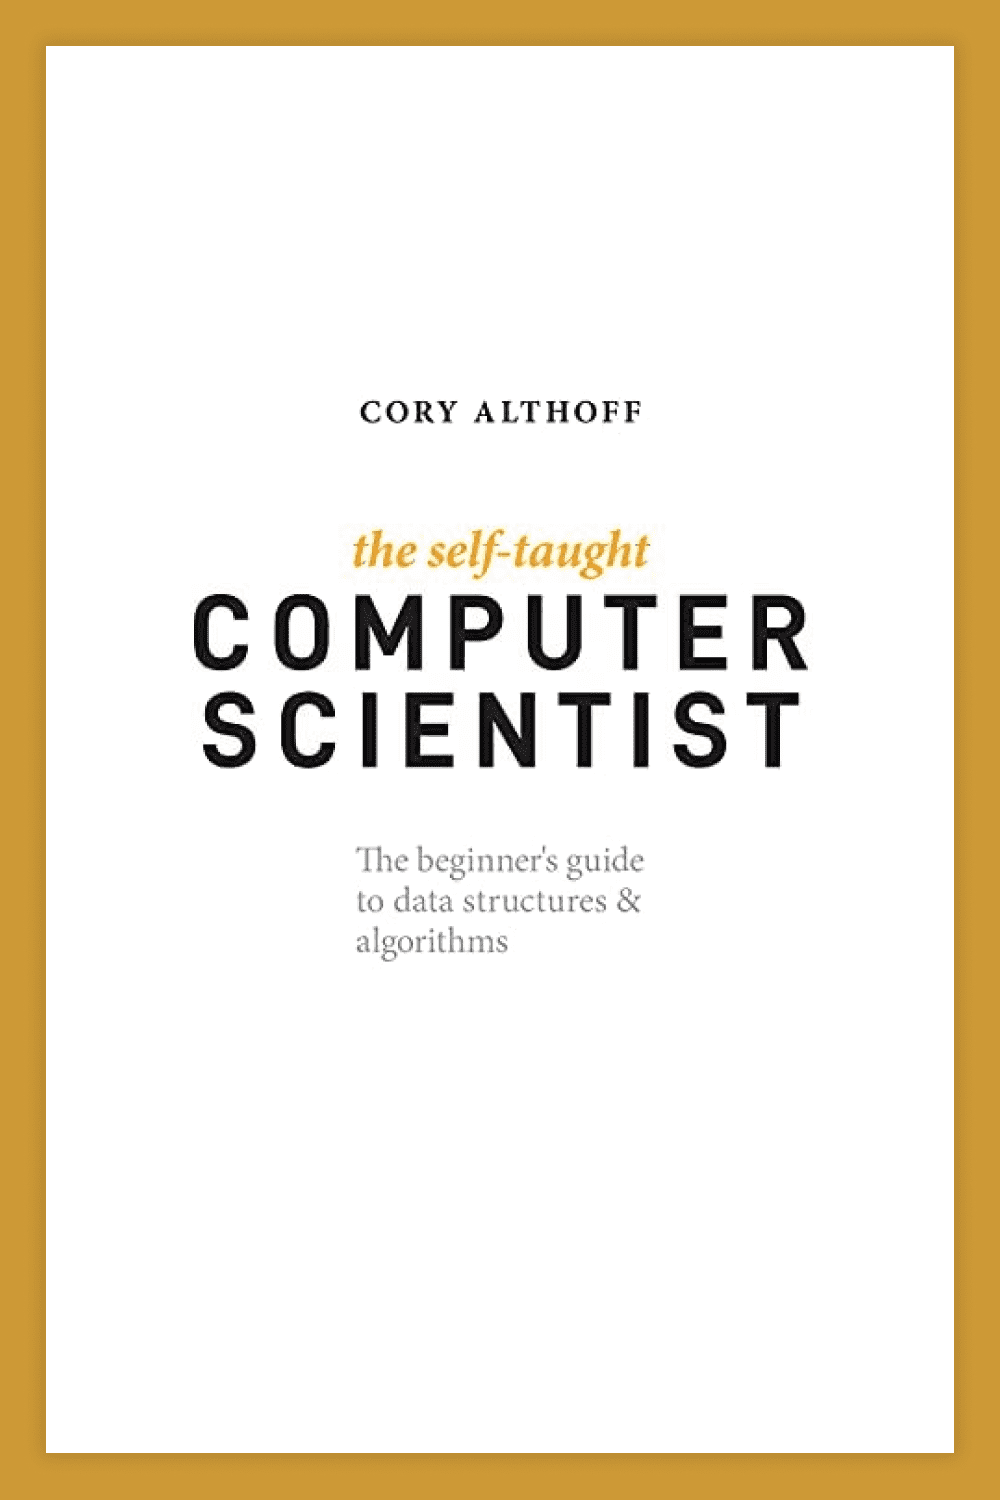 The cover of the book The Self-Taught Computer Scientist.